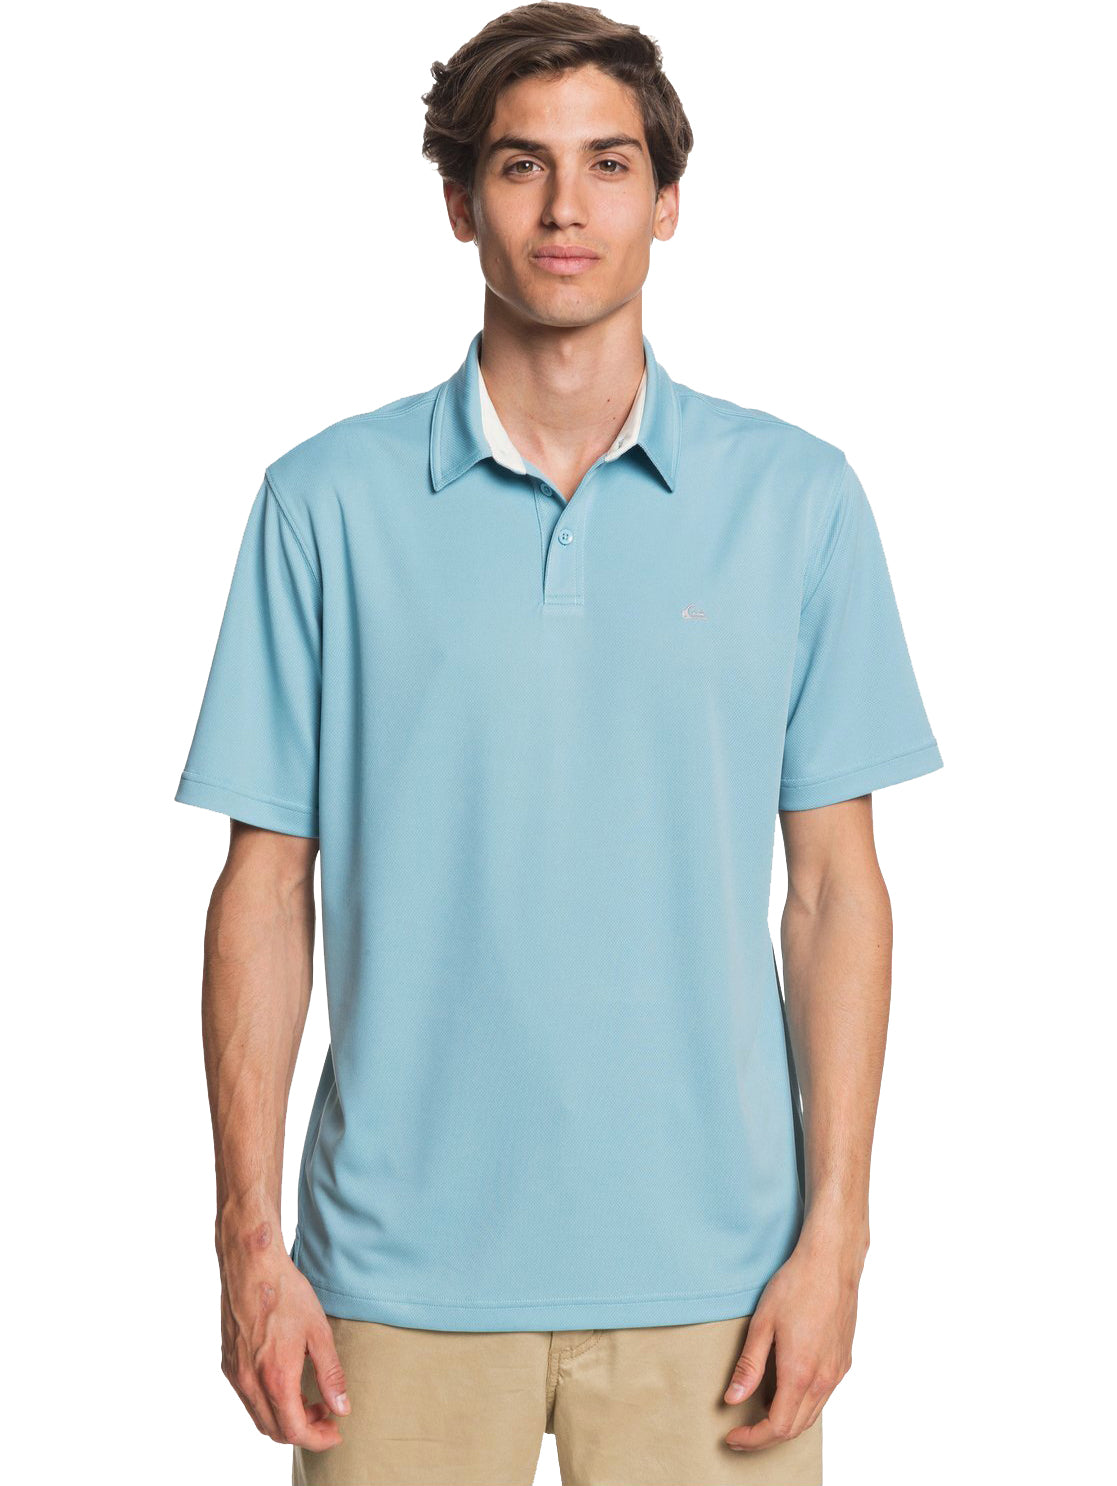 Quiksilver Waterman Water 2 Polo BHW0 L